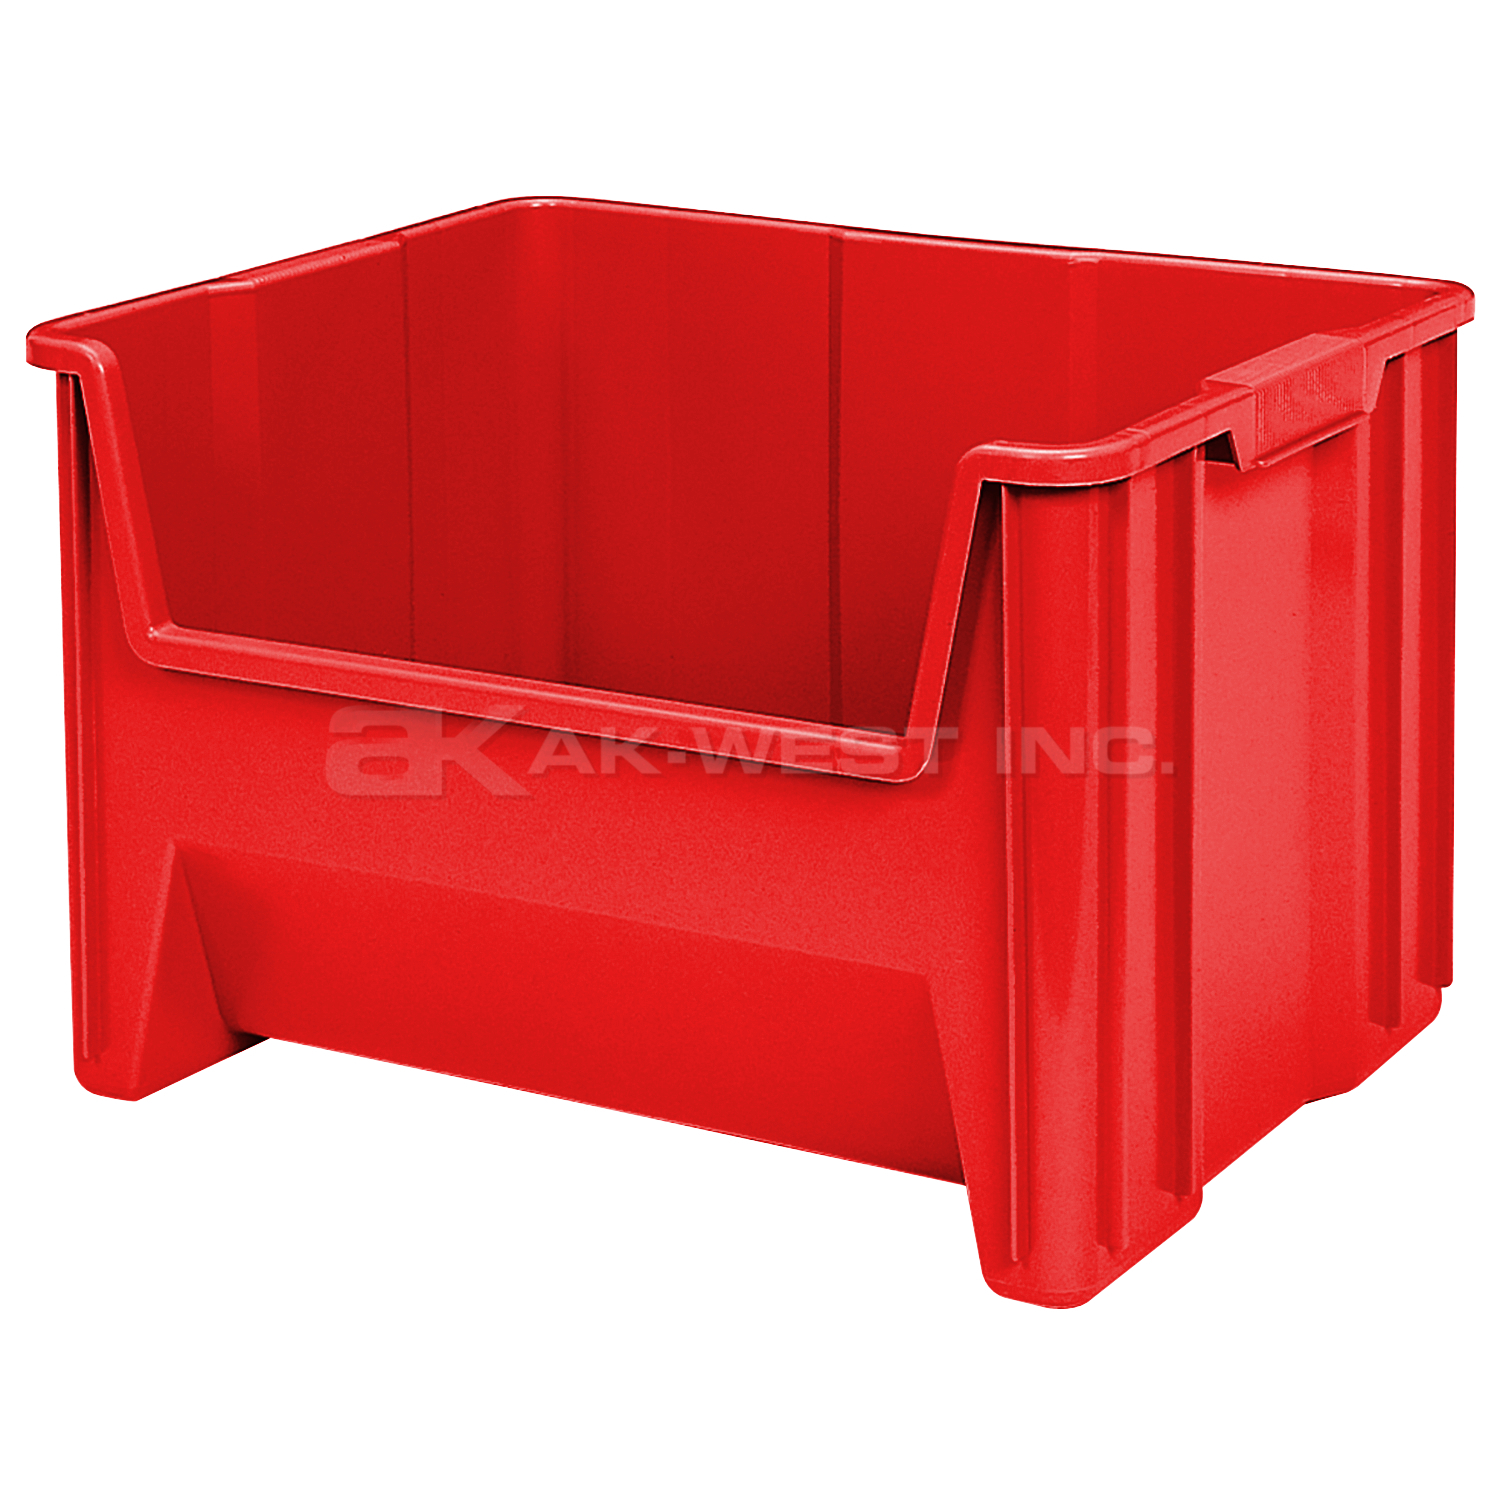 Red, 15-1/4" x 19-7/8" x 12-7/16" Stack and Store Bin (3 Per Carton)